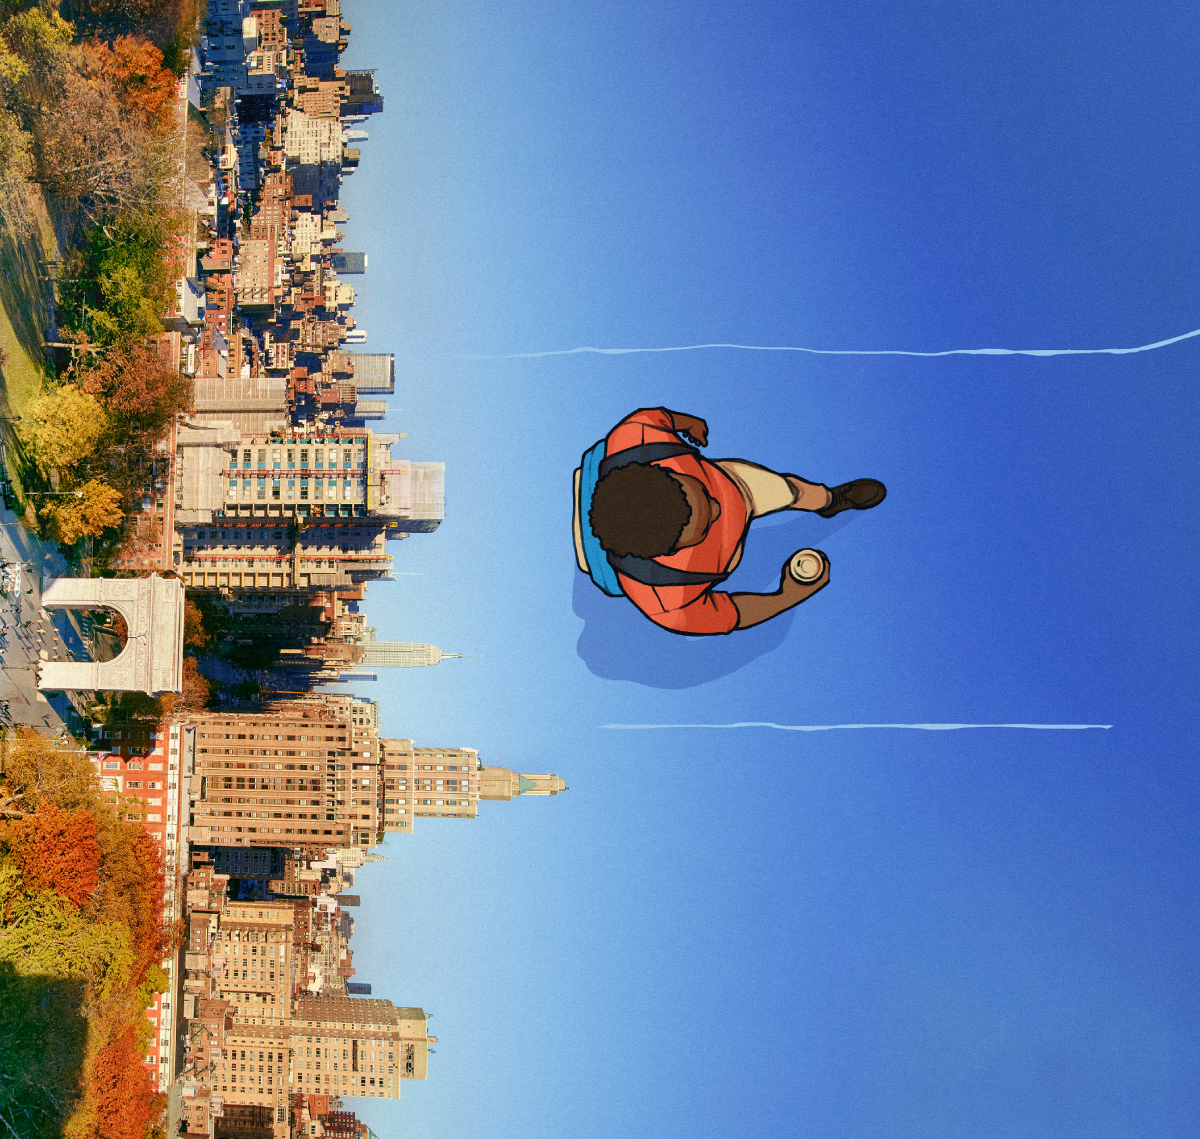 A bird’s-eye view of an illustrated Black student walking along a path with the Washington Square Park skyline as the backdrop.